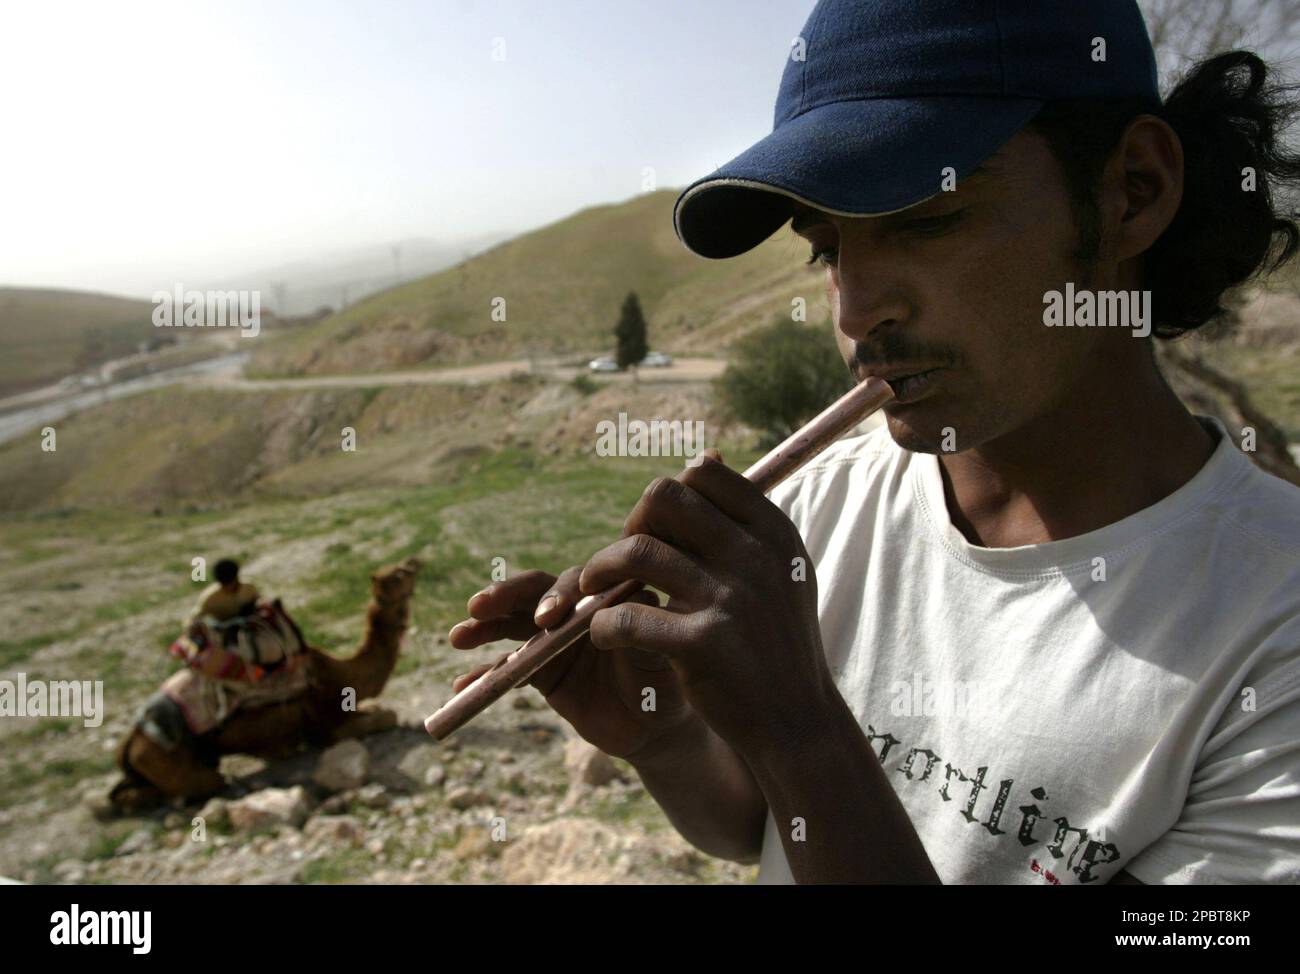 A Bedouin Arab plays his flute during a protest organized by environmental groups at the site of future construction of Israel's separation barrier, on the Good Samaritan Hill in the Judean Desert, near the West Bank town of Jericho, Monday, March 12, 2007. The Friends of the Earth organization says the proposed route of Israel's separation barrier will carve up parts of the Judean Desert around the Israeli settlement of Ma'aleh Adumim. Israel says the barrier is necessary for security. (AP Photo/Emilio Morenatti) Stockfoto